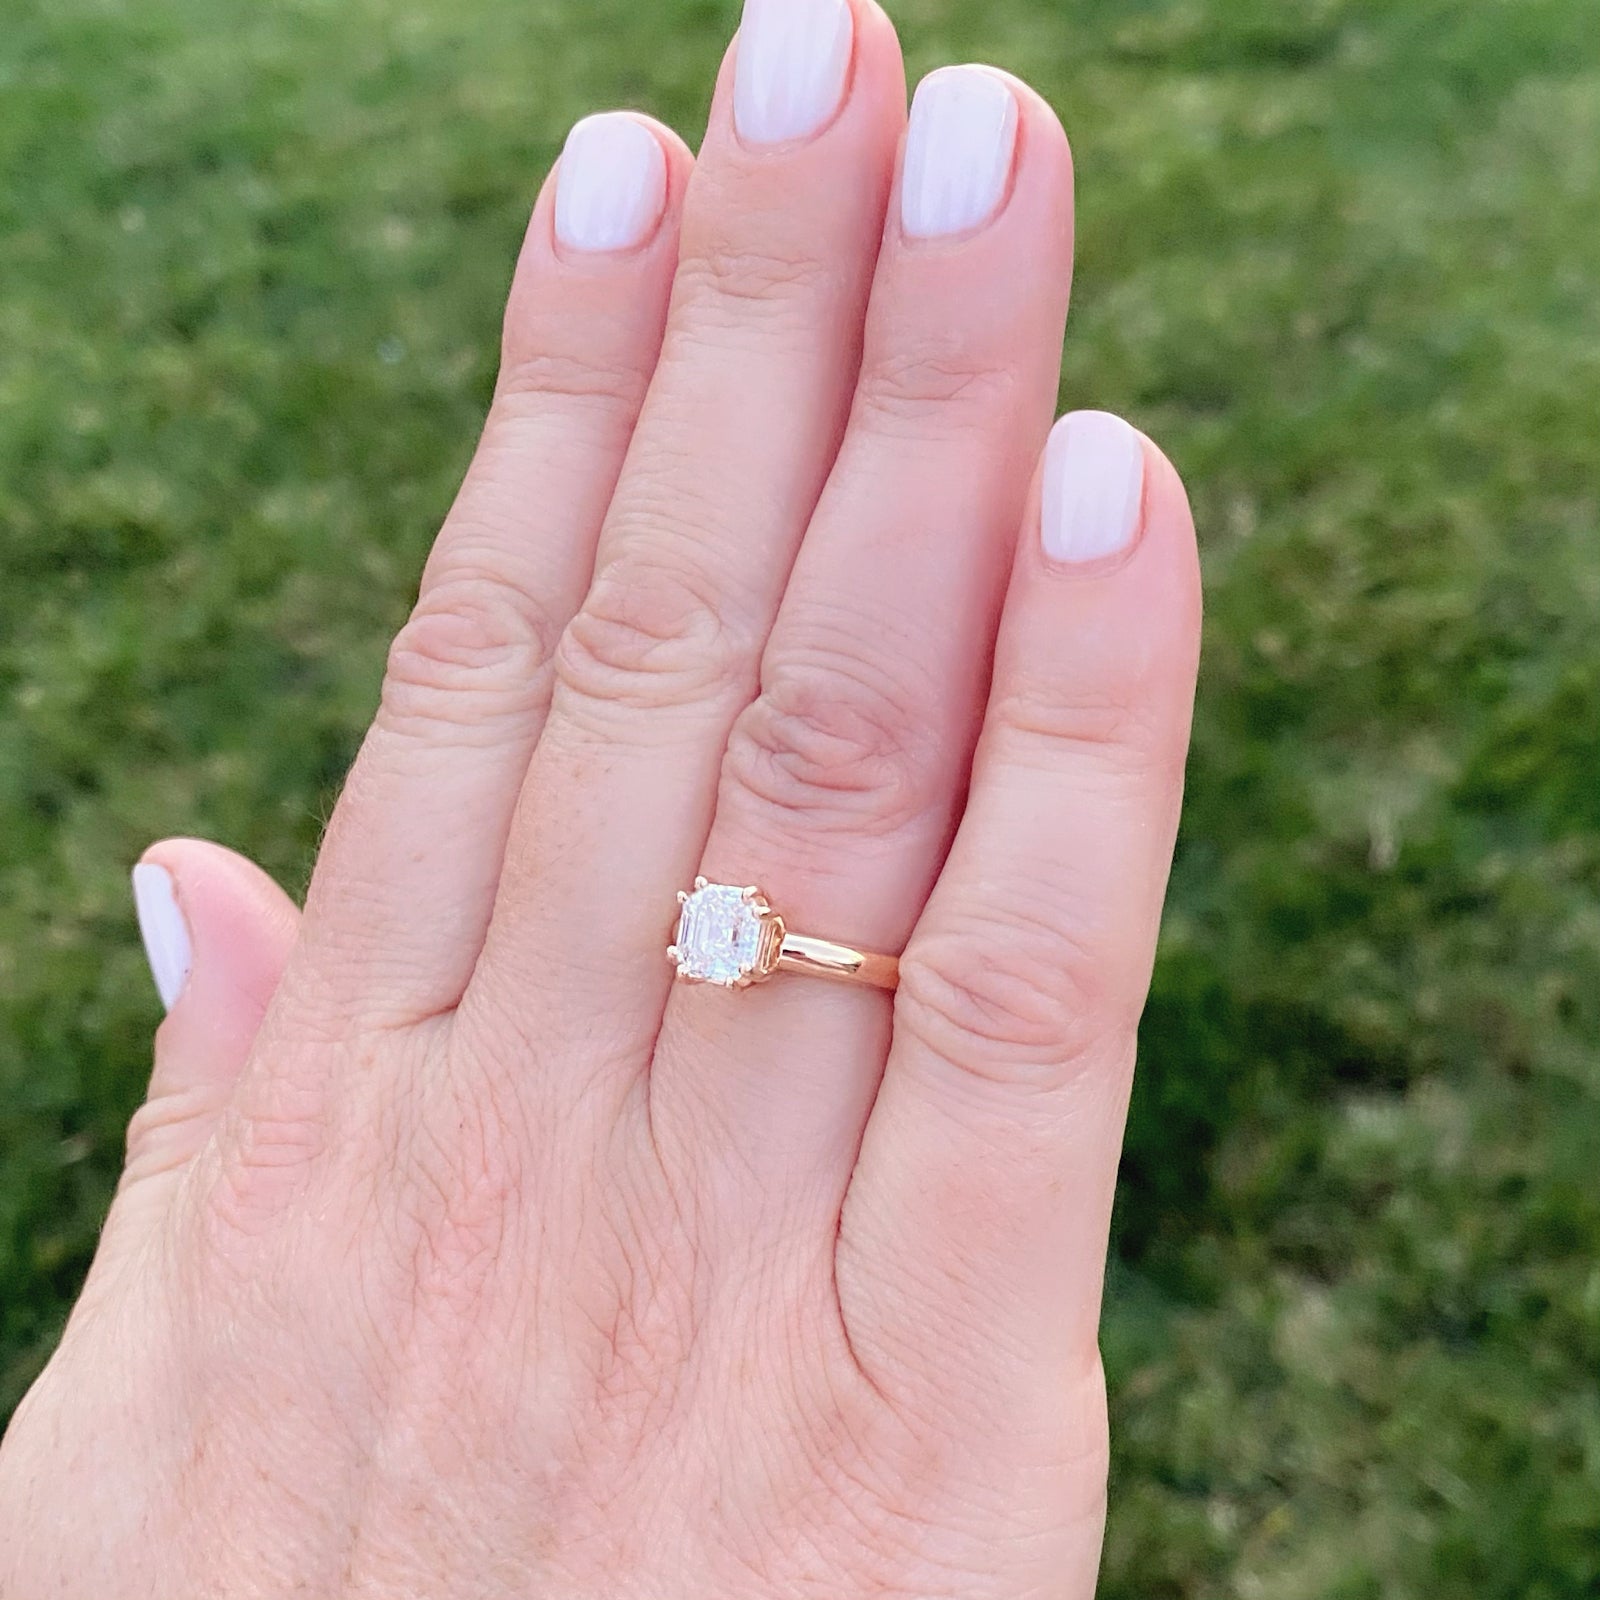 Wondering if this size is appropriate for engagement ring :  r/EngagementRings